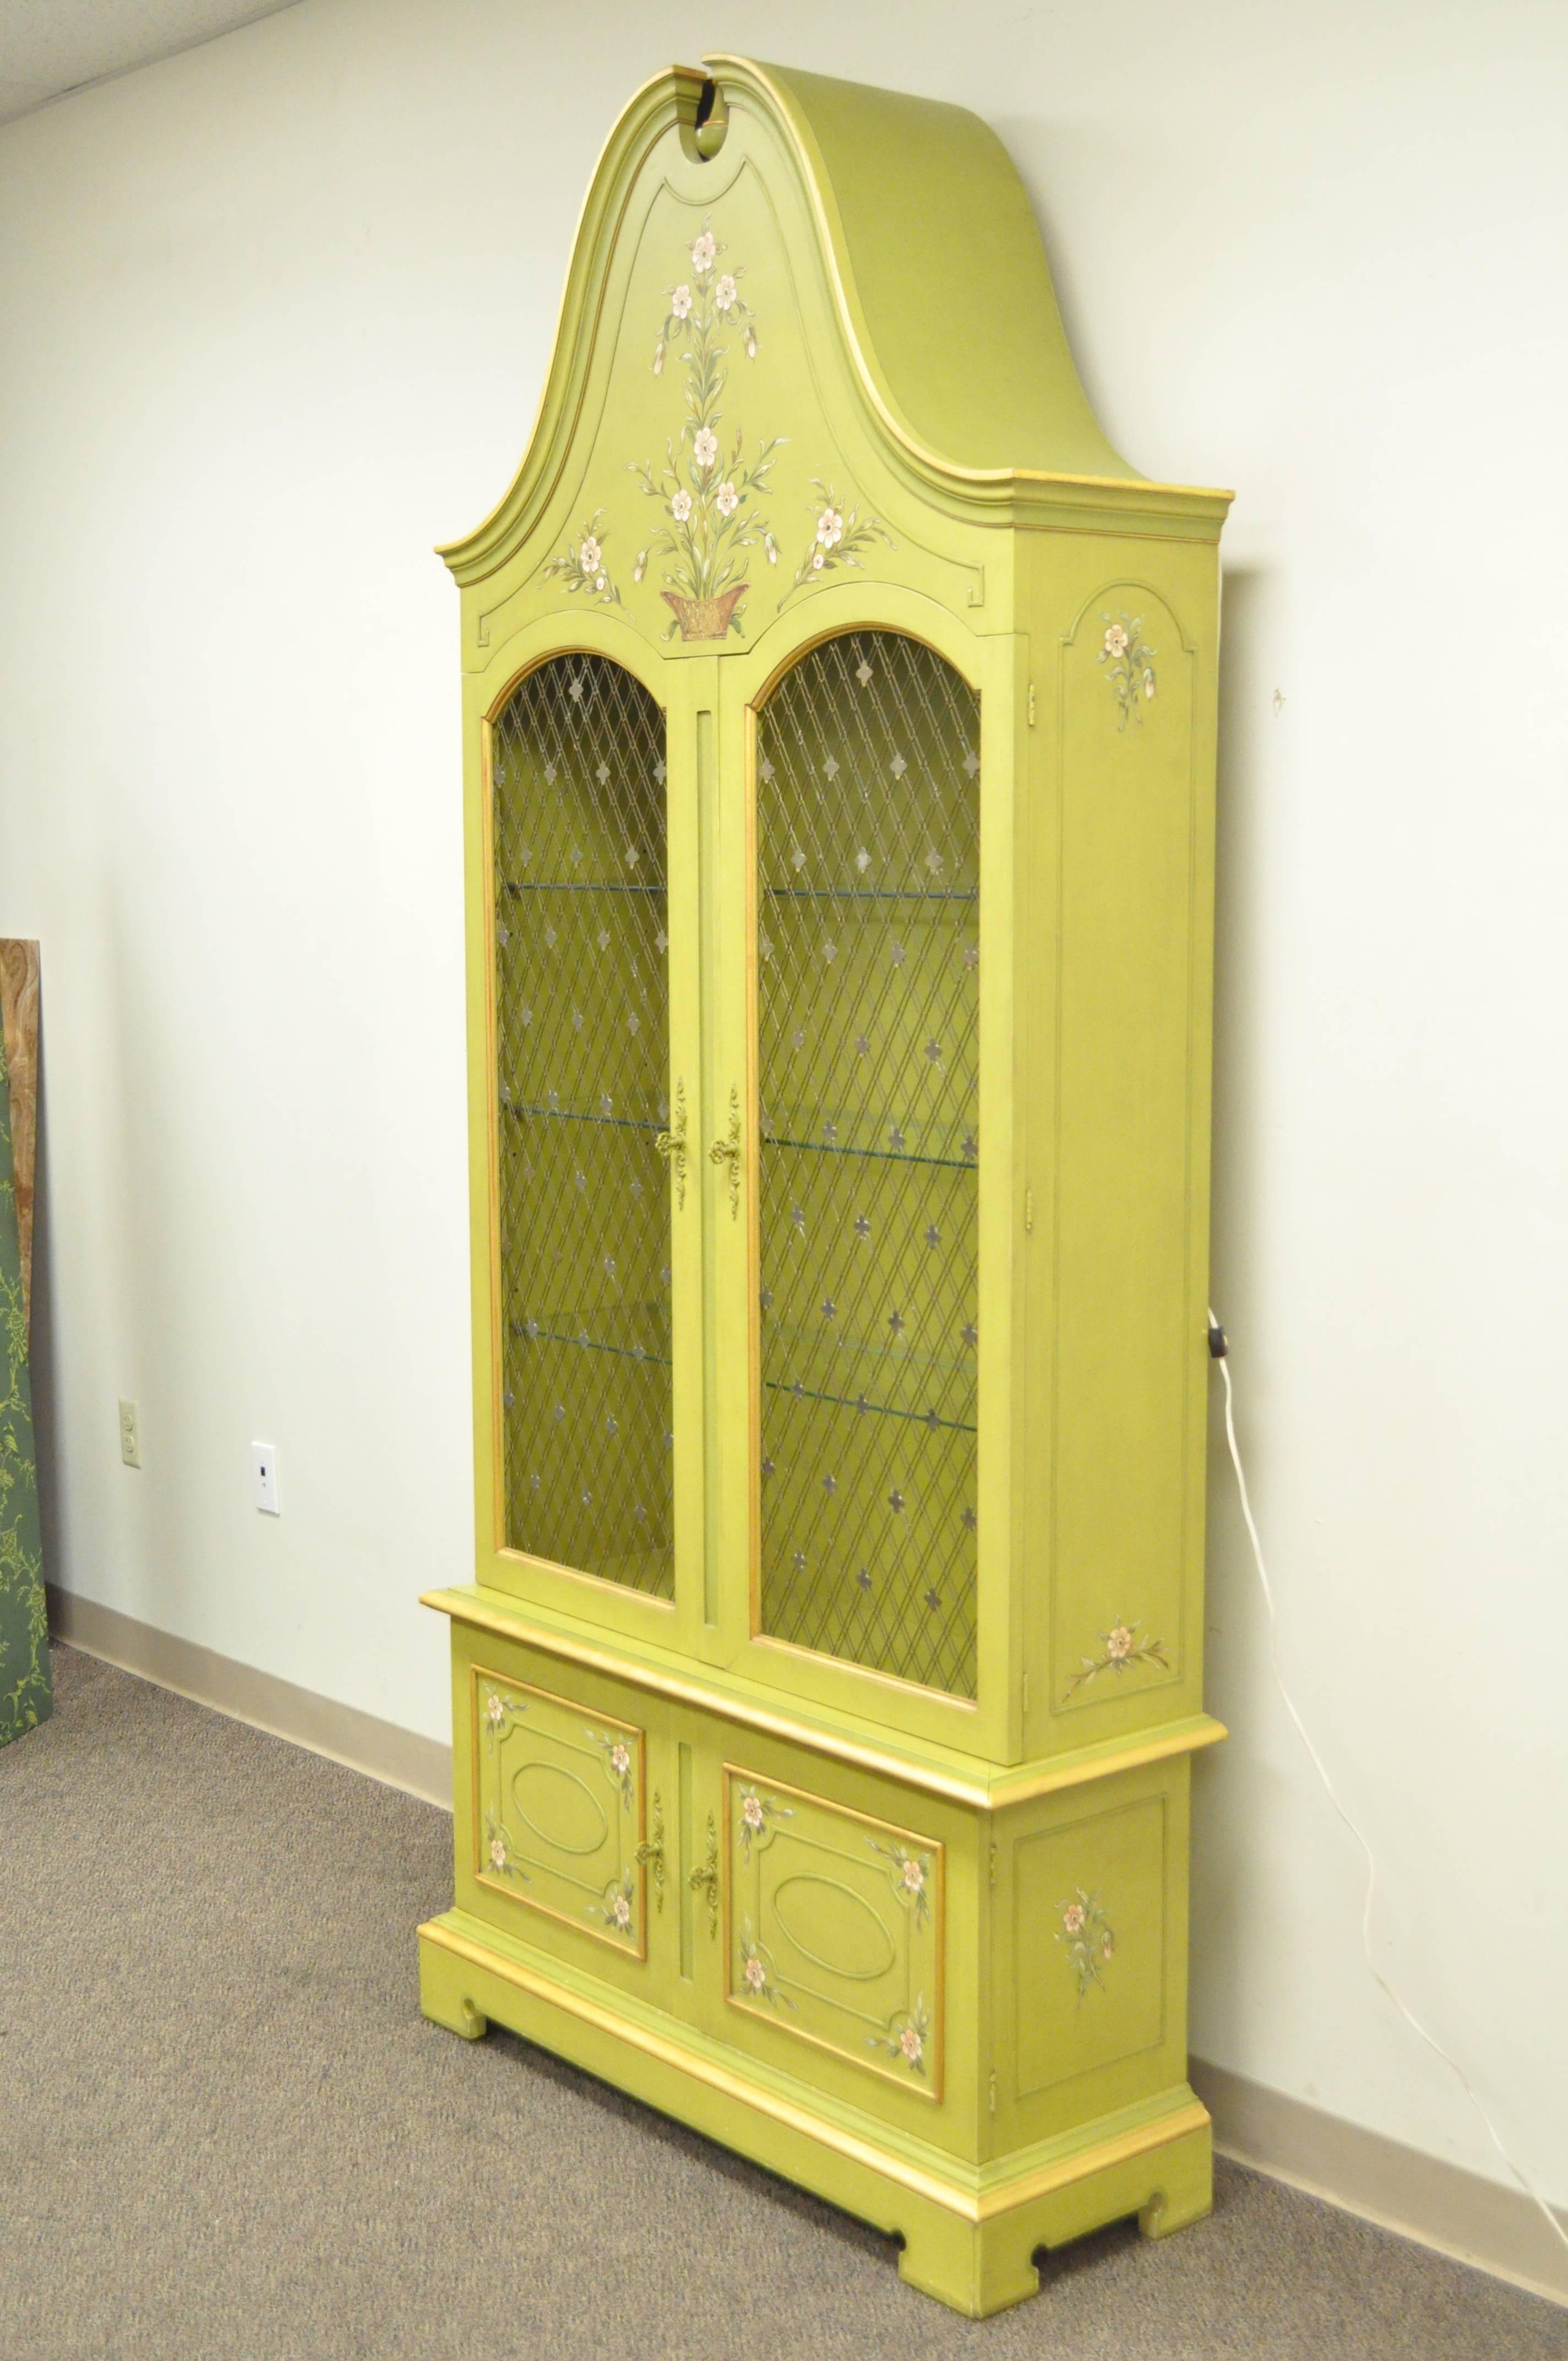 Two-piece hand-painted curio cabinet with elegant narrow form and dramatic dome/bonnet top by John Widdicomb. Item features gilt metal wire door inserts with quatrefoil mounts, illuminated interior, three glass shelves, hand-painted floral detailing